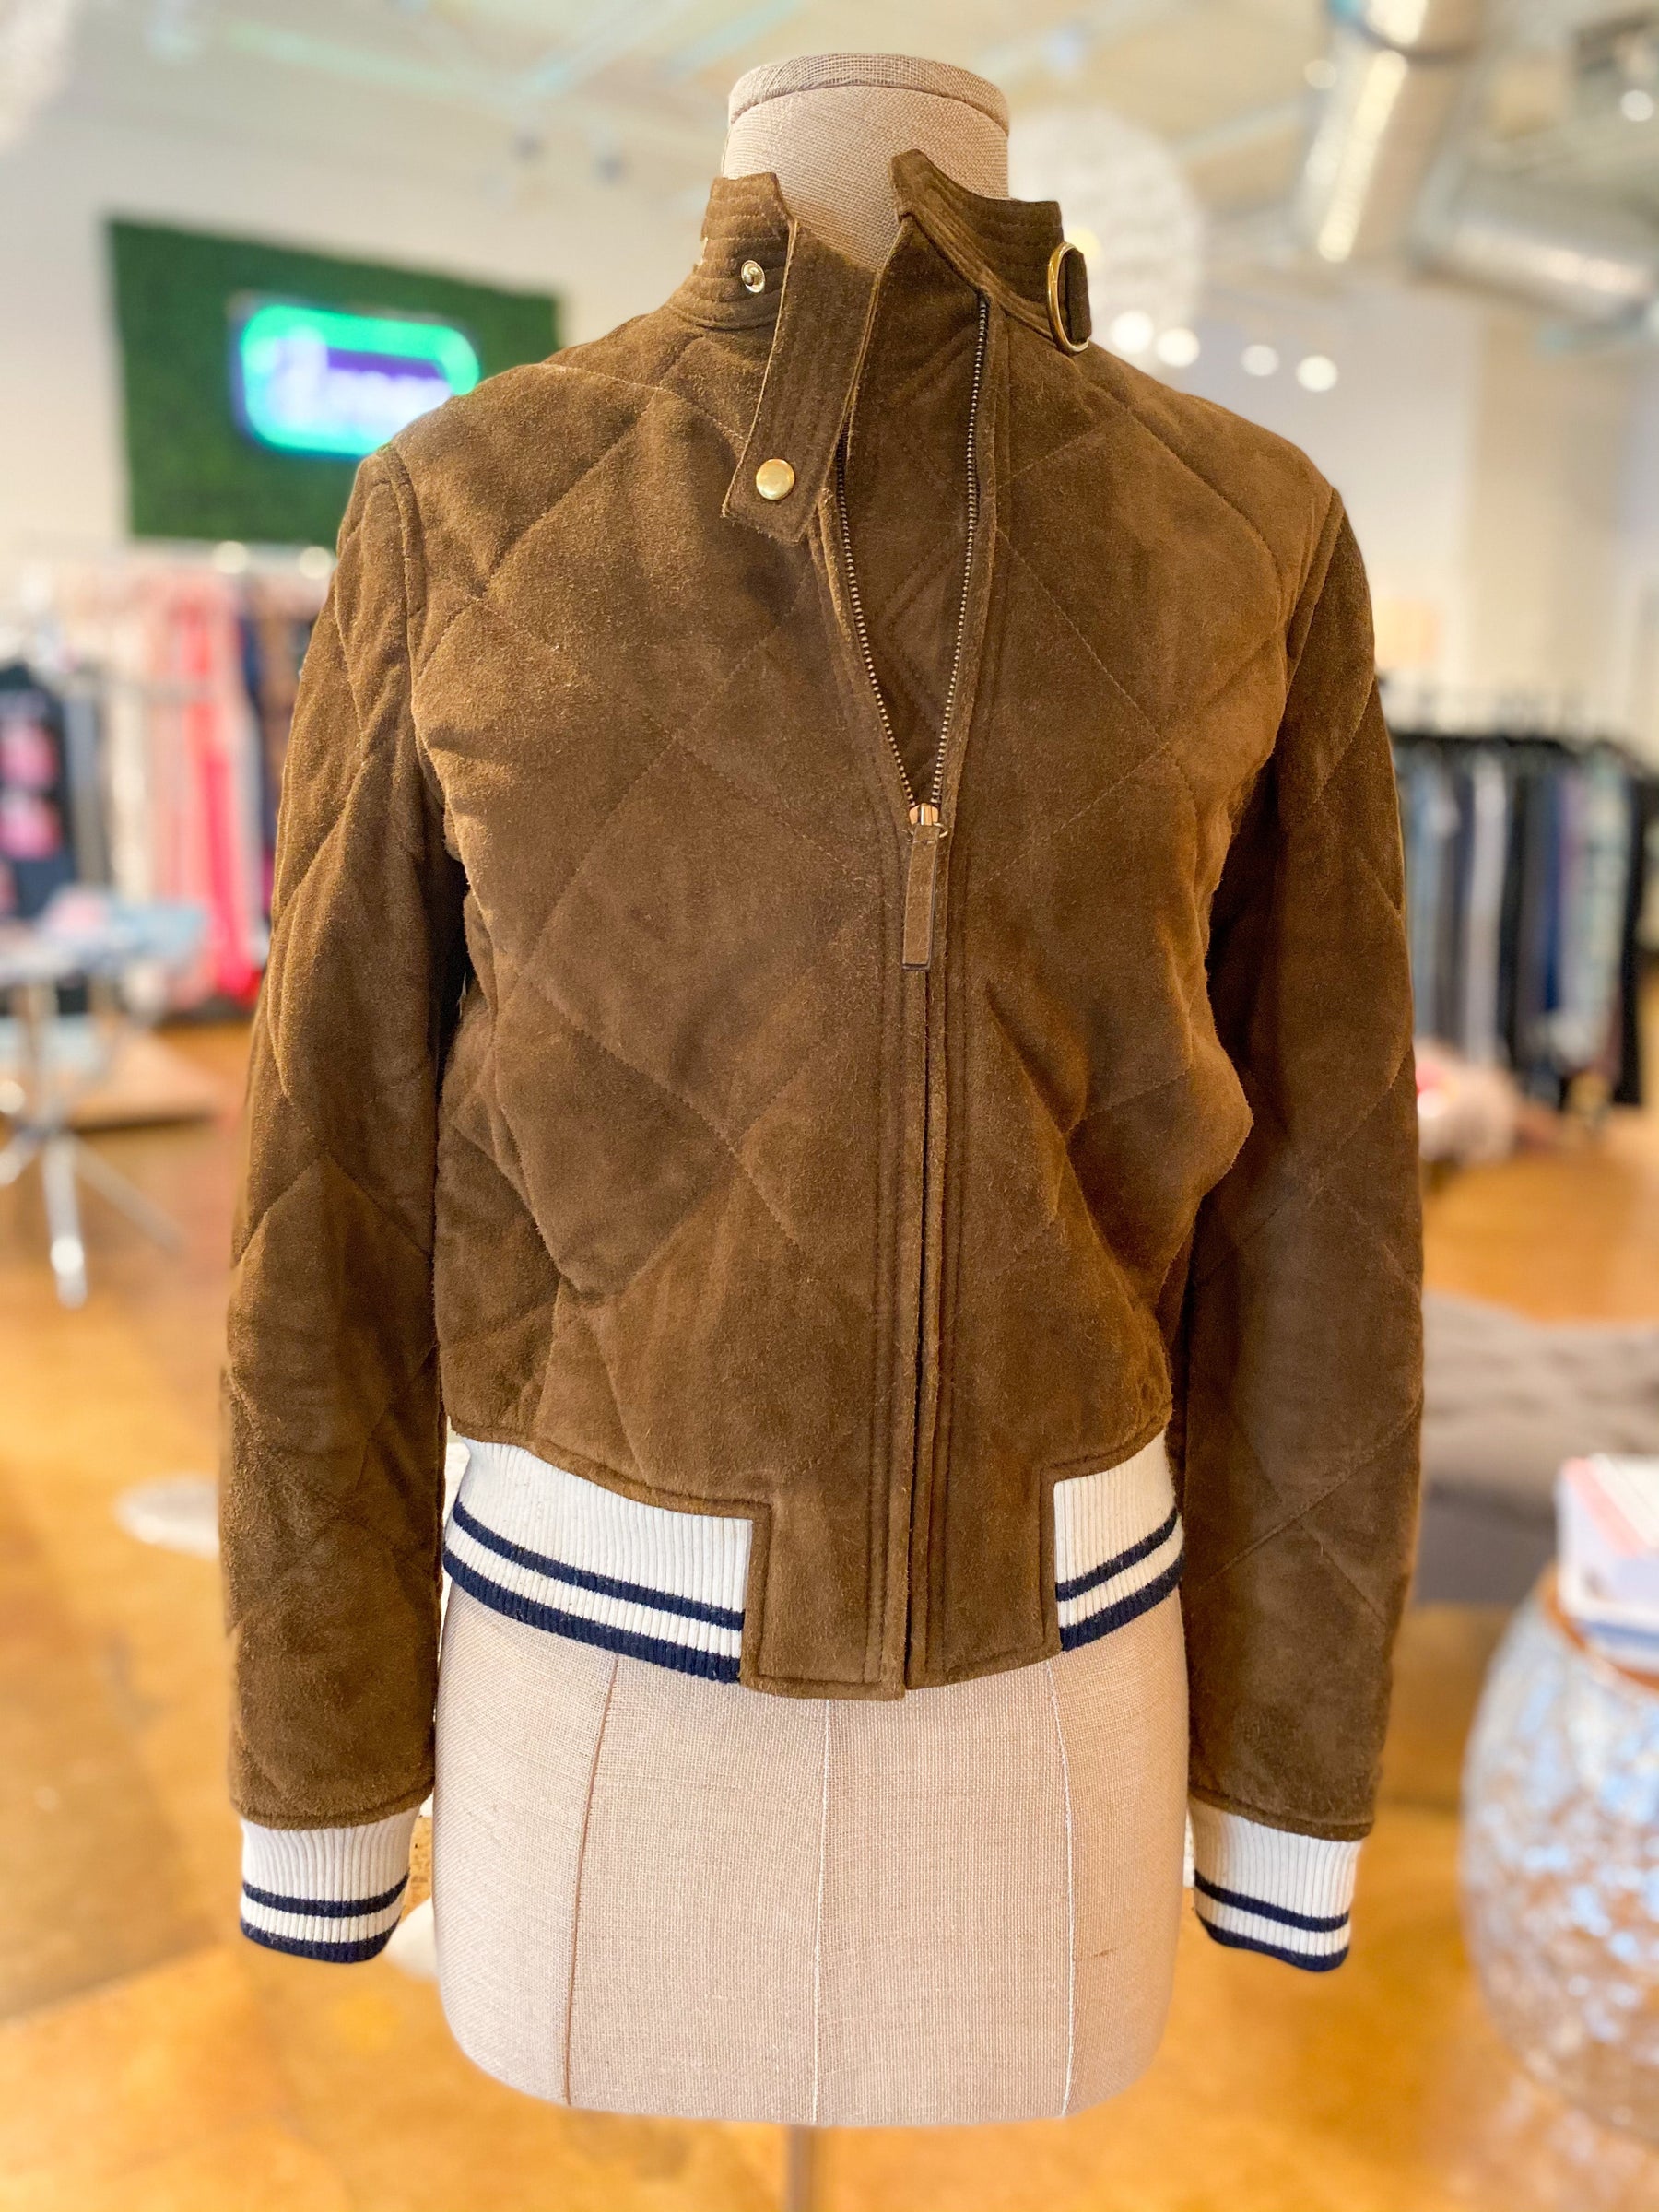 Tory Burch Suede Bomber Jacket - dress. Raleigh Consignment